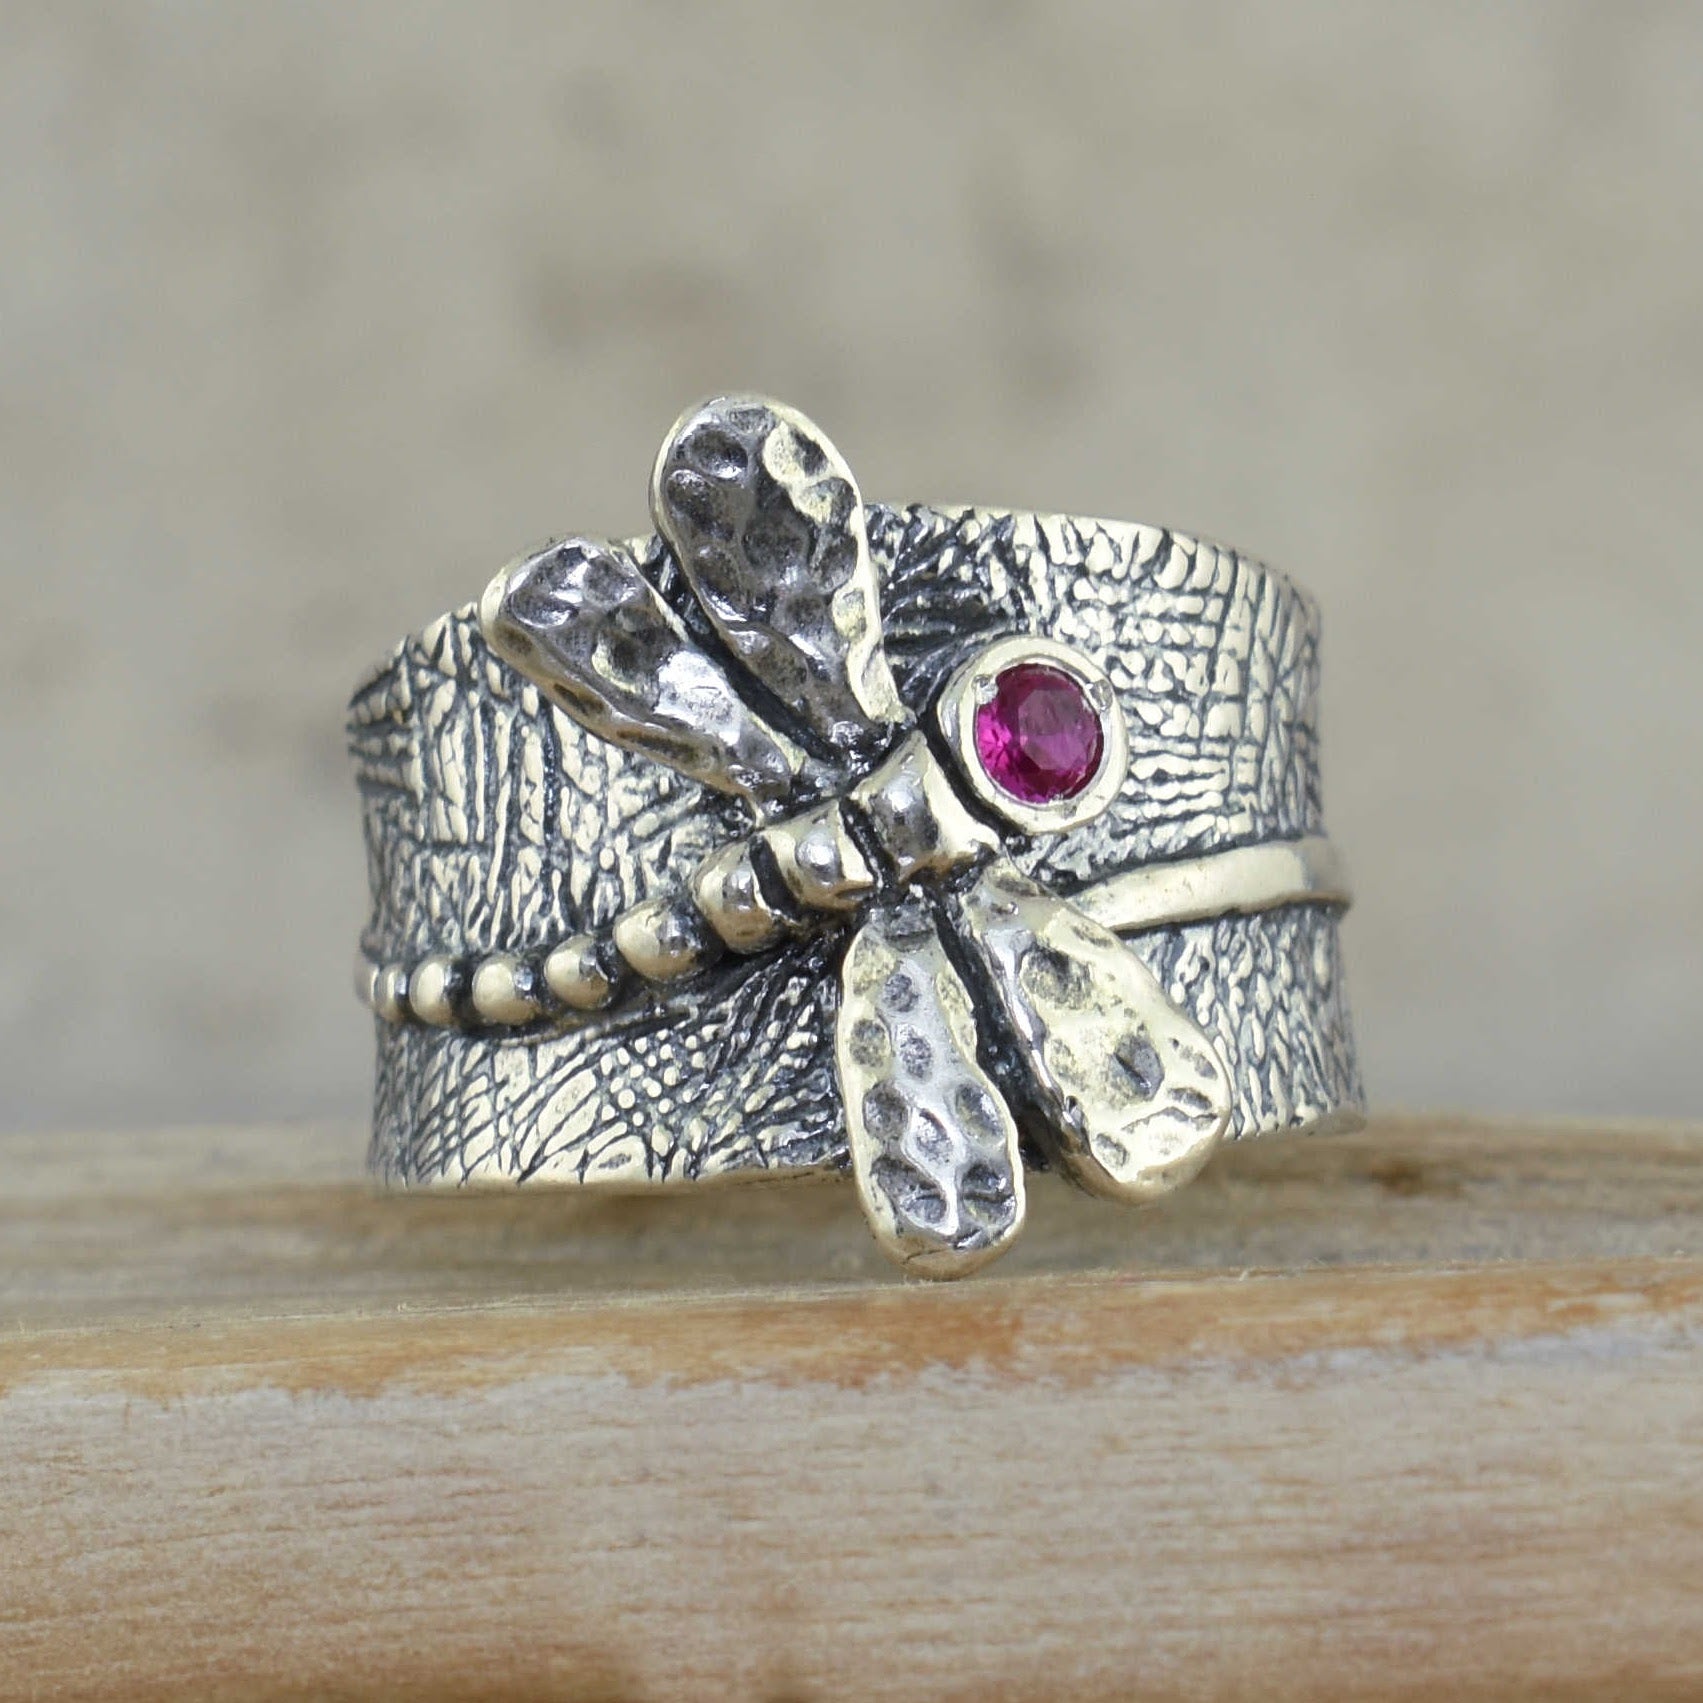 Dragonfly Ring featured in .925 sterling silver and ruby CZ